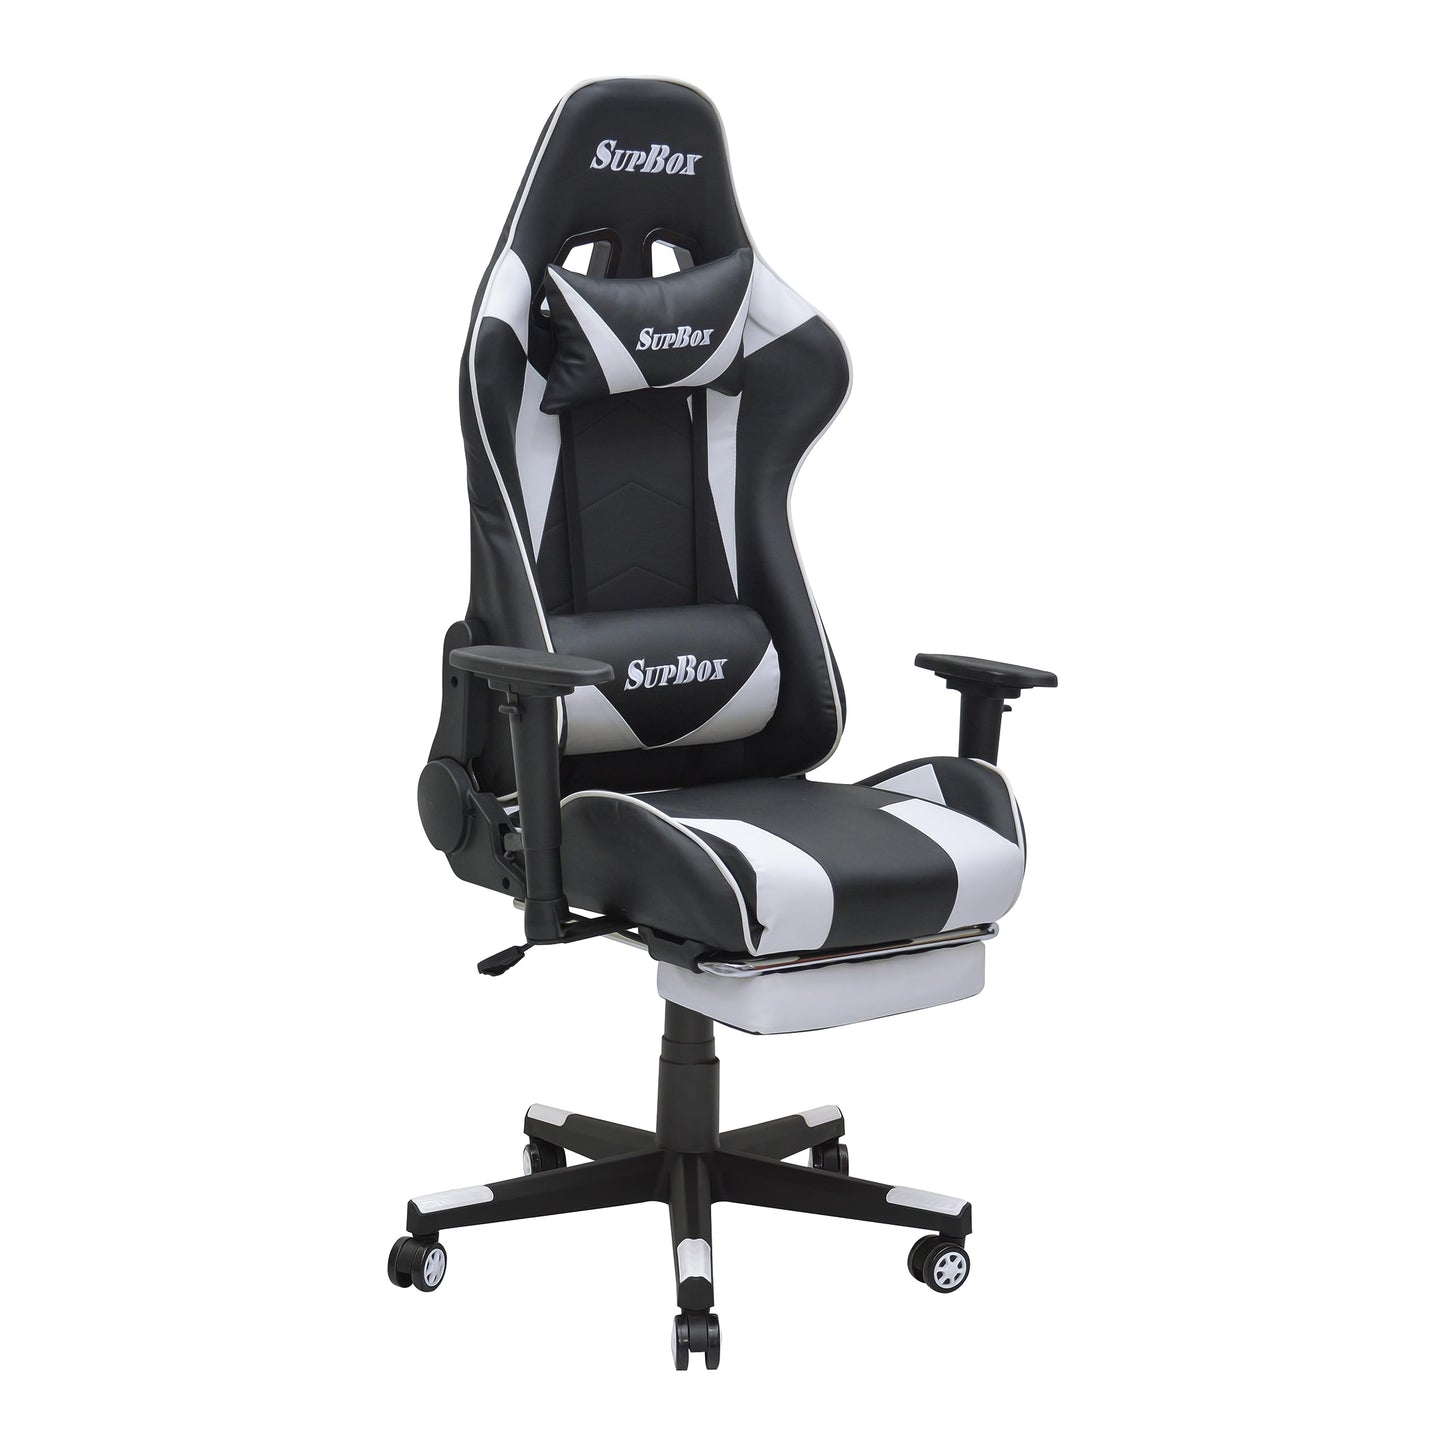 Modern design Best Executive gaming chair MH-8886-Black-white for Video Gaming Chair for Pc with fully reclining back and head rest amd footrest and soft leather (Black White)